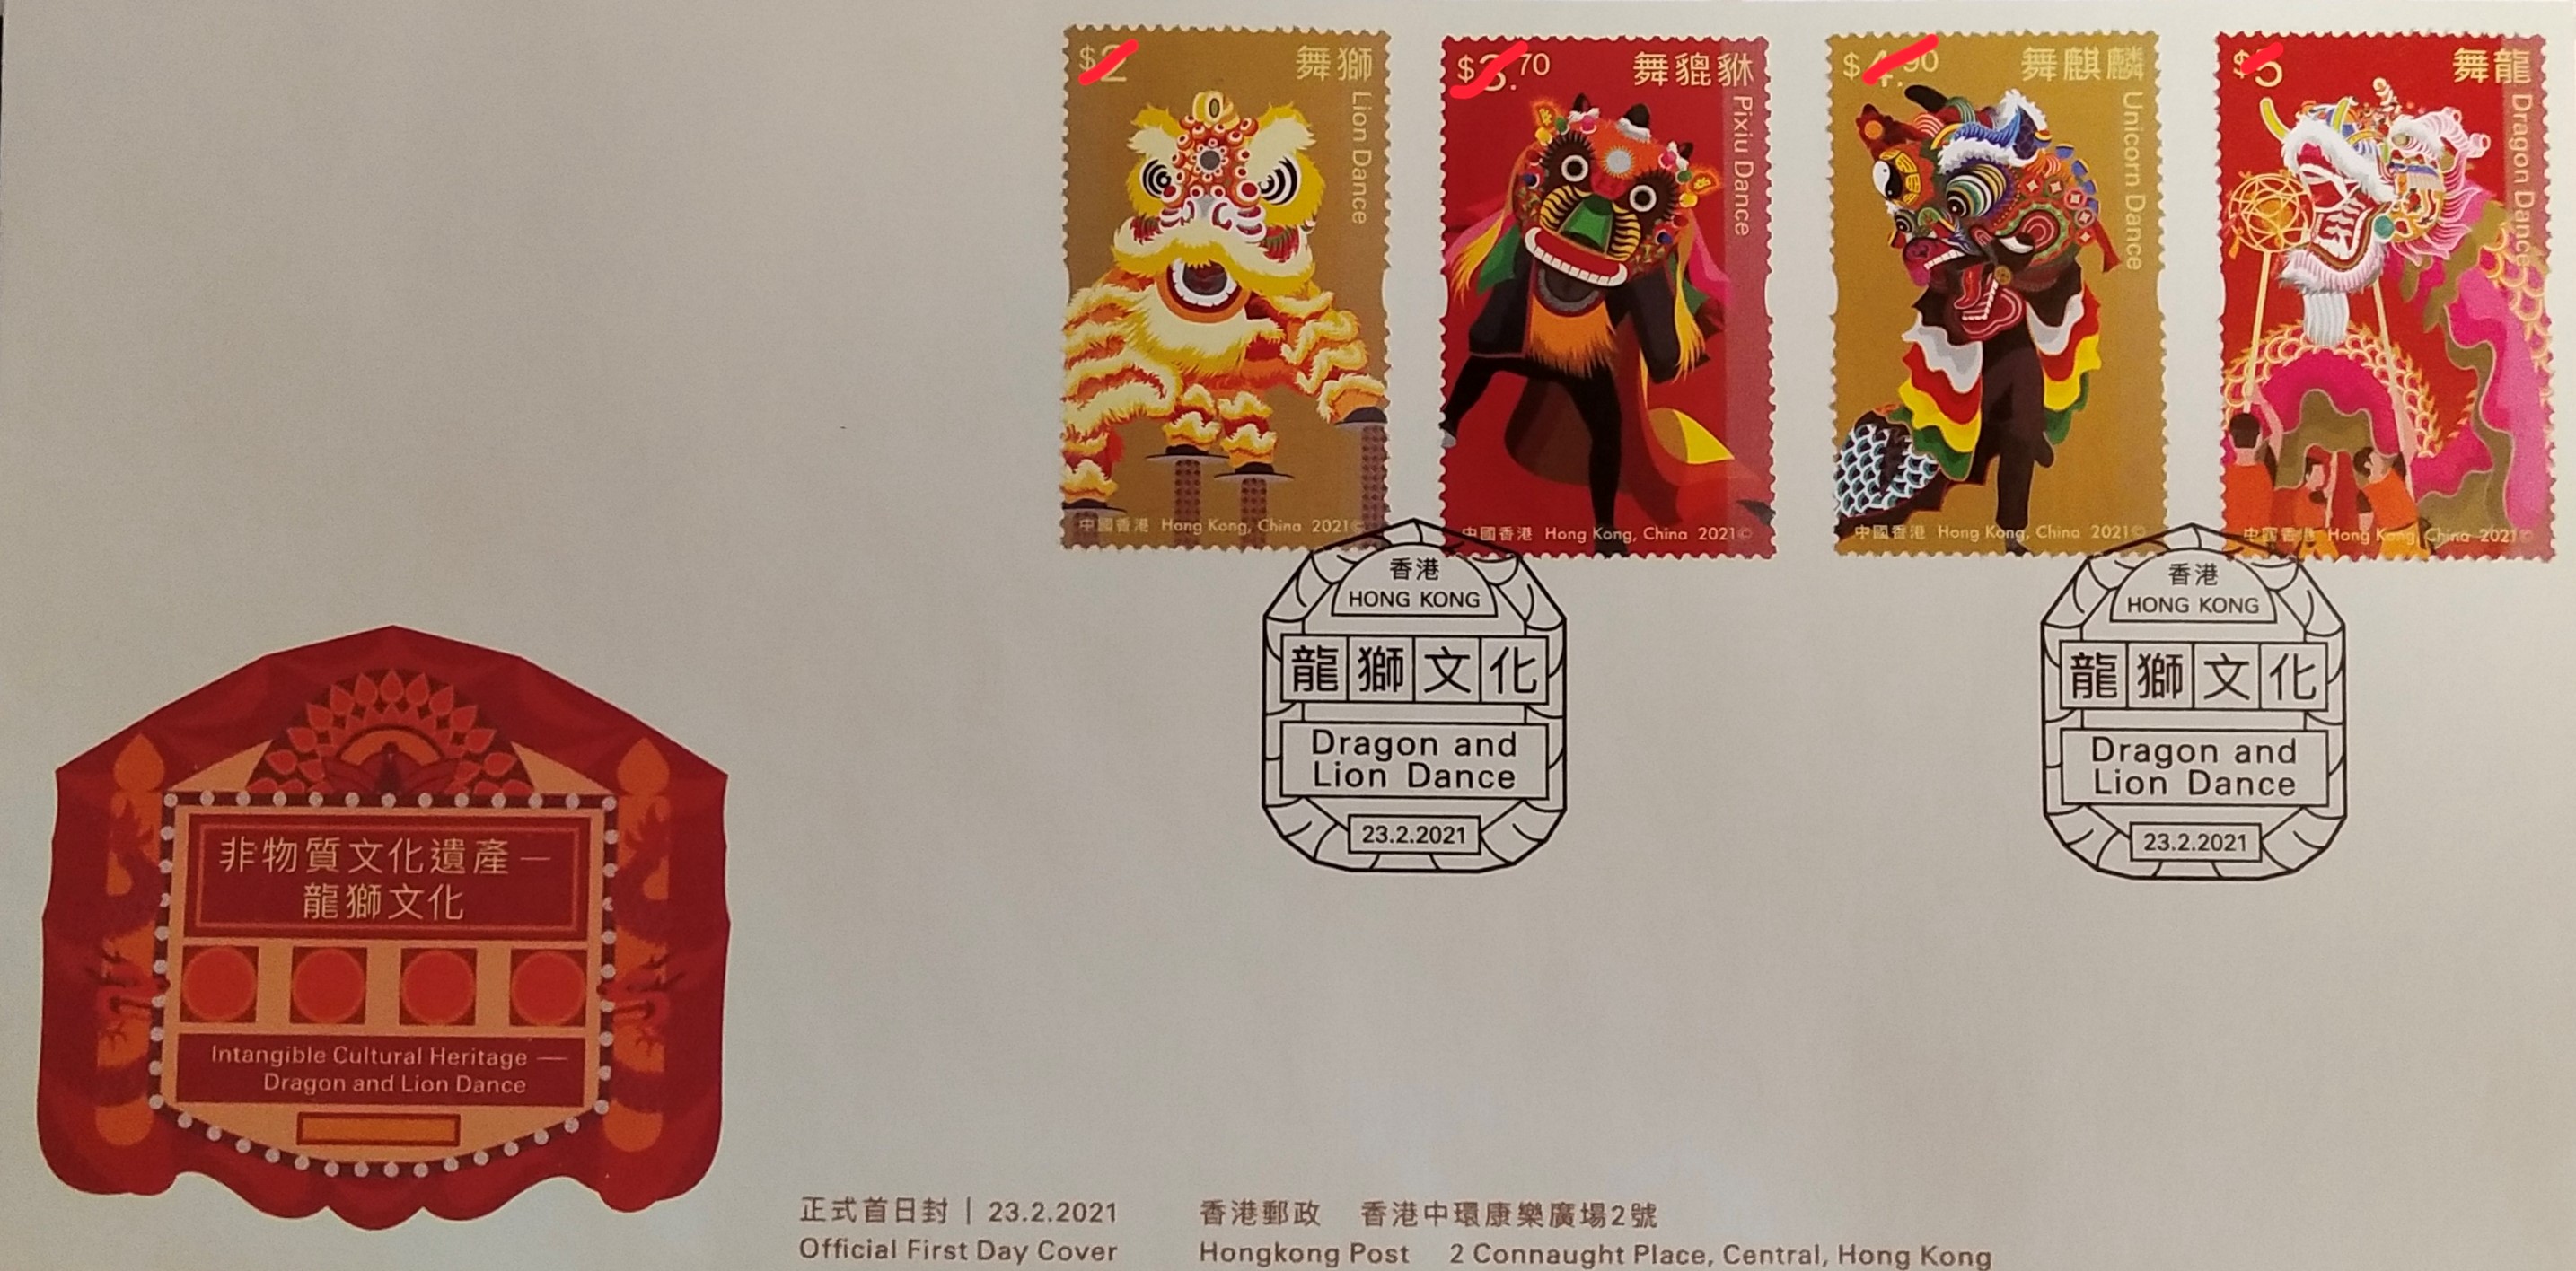 Intangible cultural heritage, dragon and lion dance special stamps